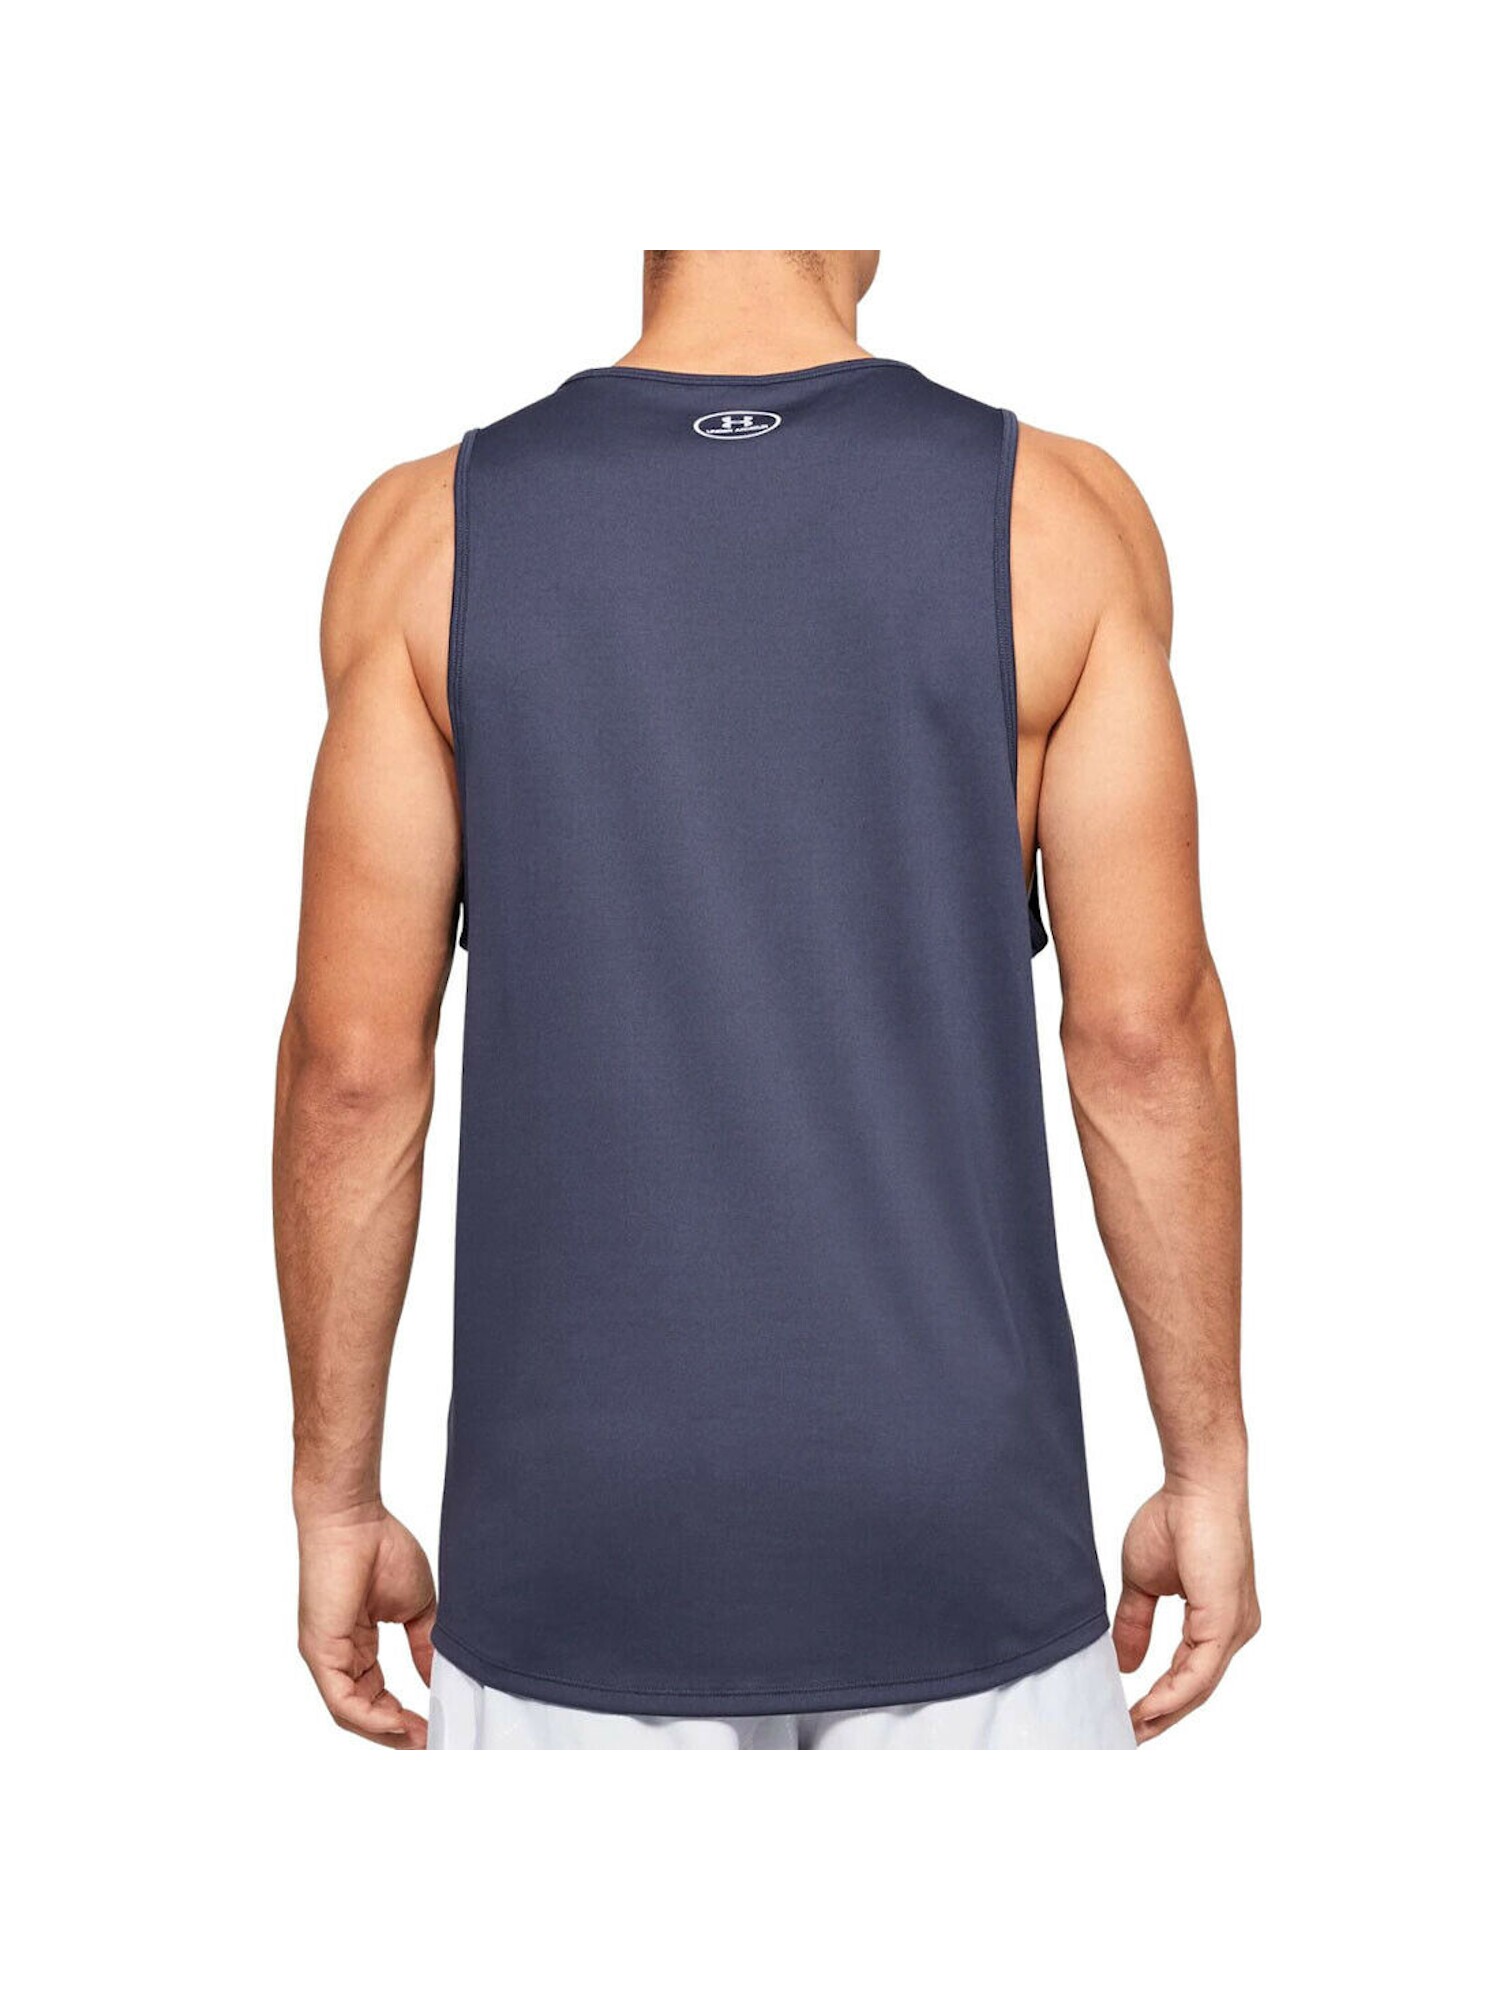 UNDER ARMOUR Mens Blue Logo Graphic Sleeveless Scoop Neck Tank Top S - image 2 of 3